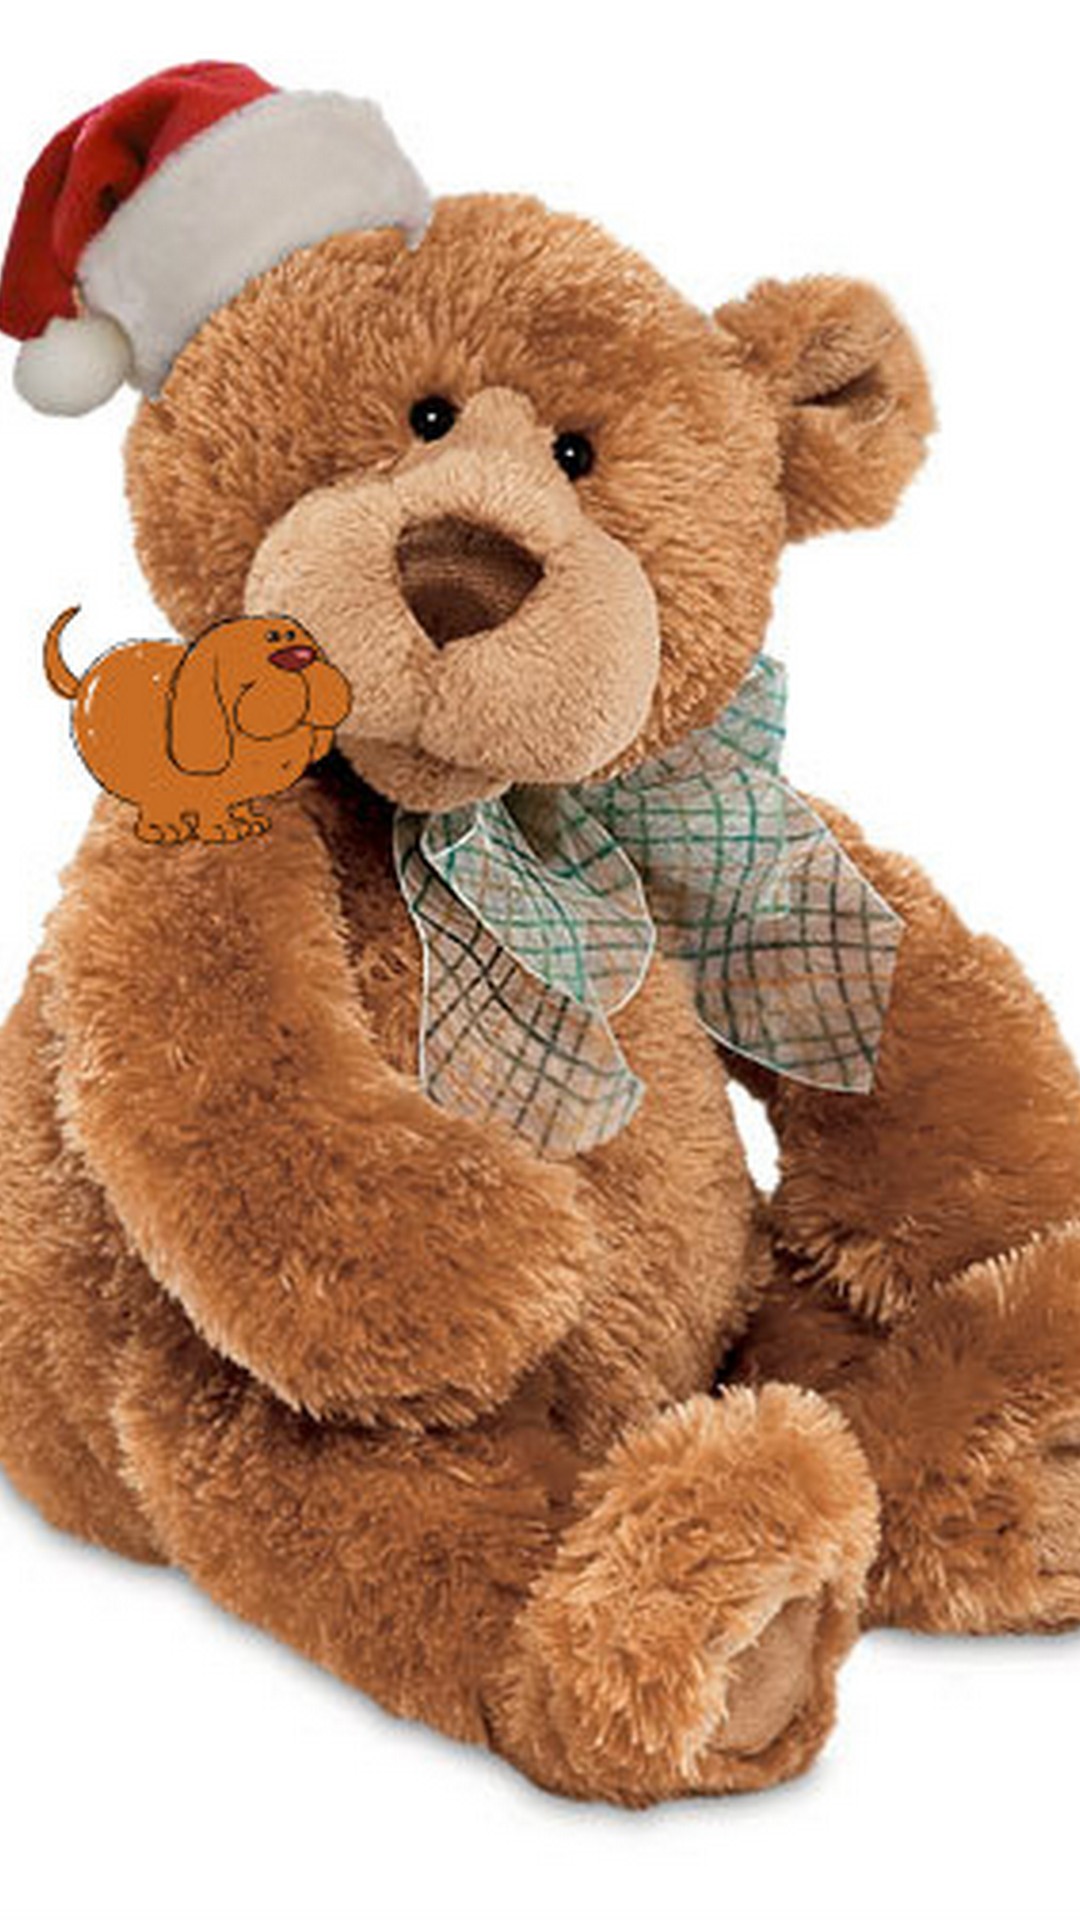 Teddy Bear Big Android Wallpaper with resolution 1080X1920 pixel. You can make this wallpaper for your Android backgrounds, Tablet, Smartphones Screensavers and Mobile Phone Lock Screen